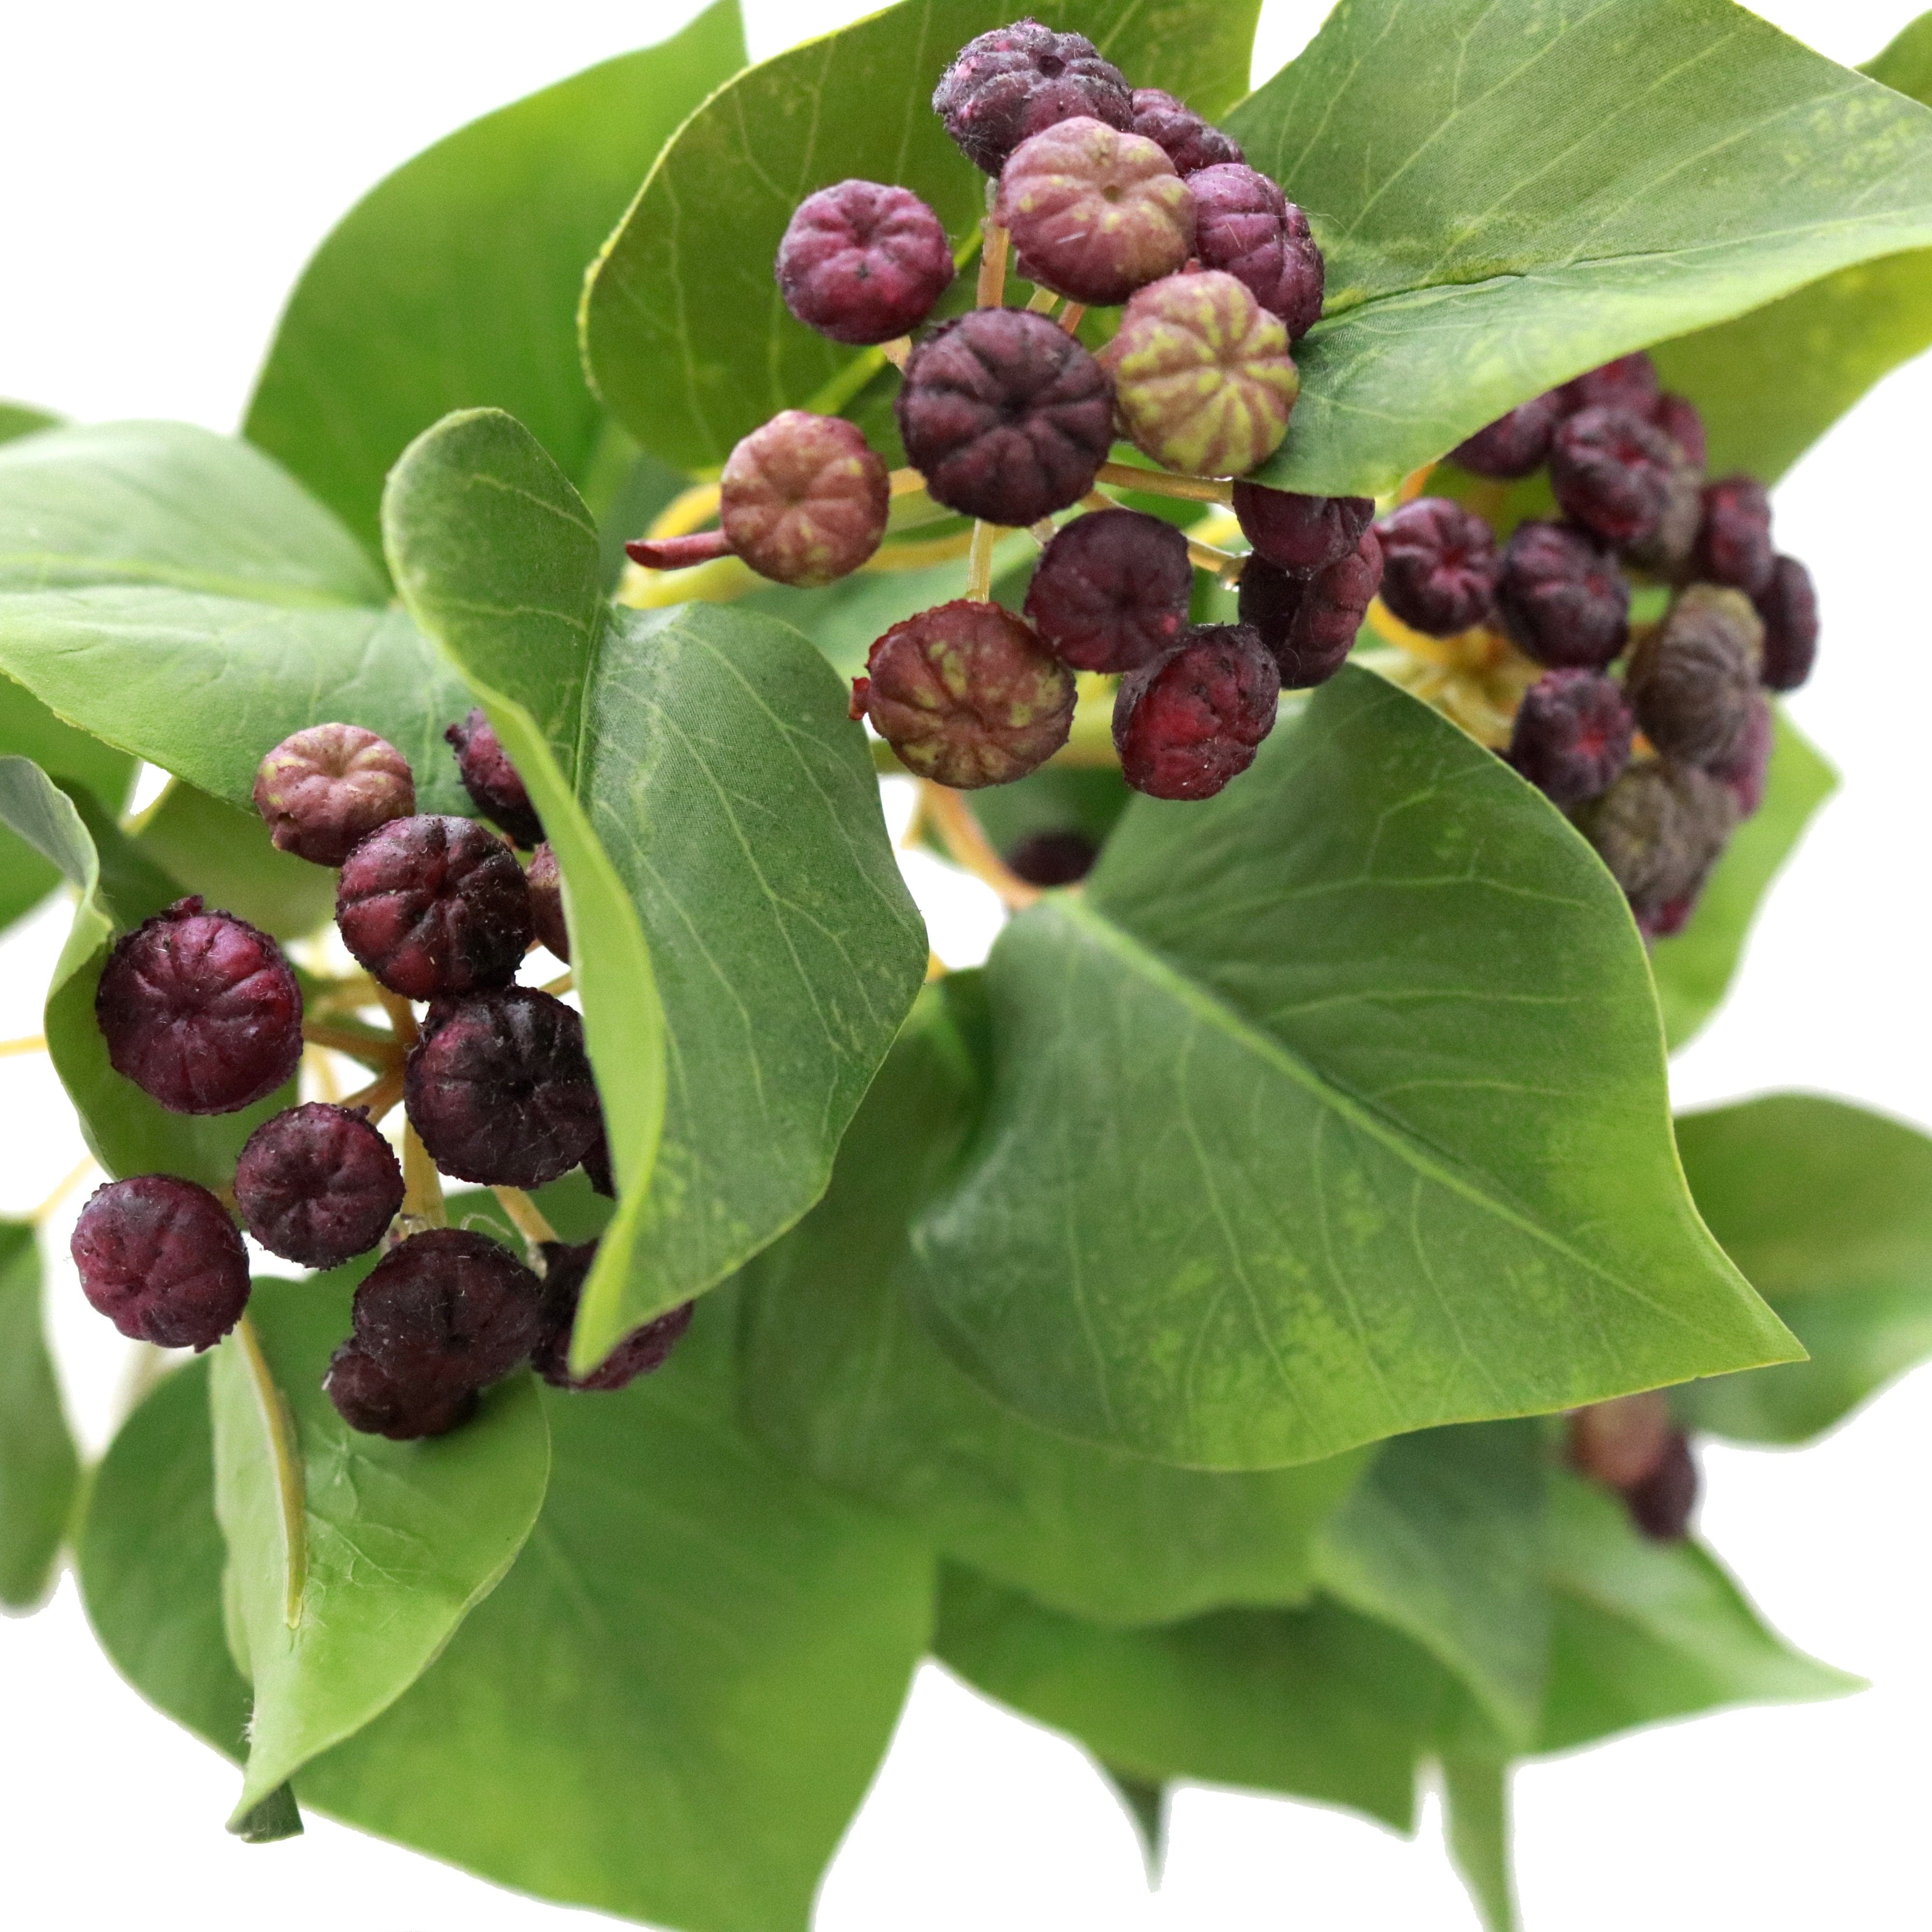 luxury artificial fake silk flowers green ivy leaf greenery foliage with purple berries lifelike realistic faux flowers buy online from Amaranthine Blooms UK